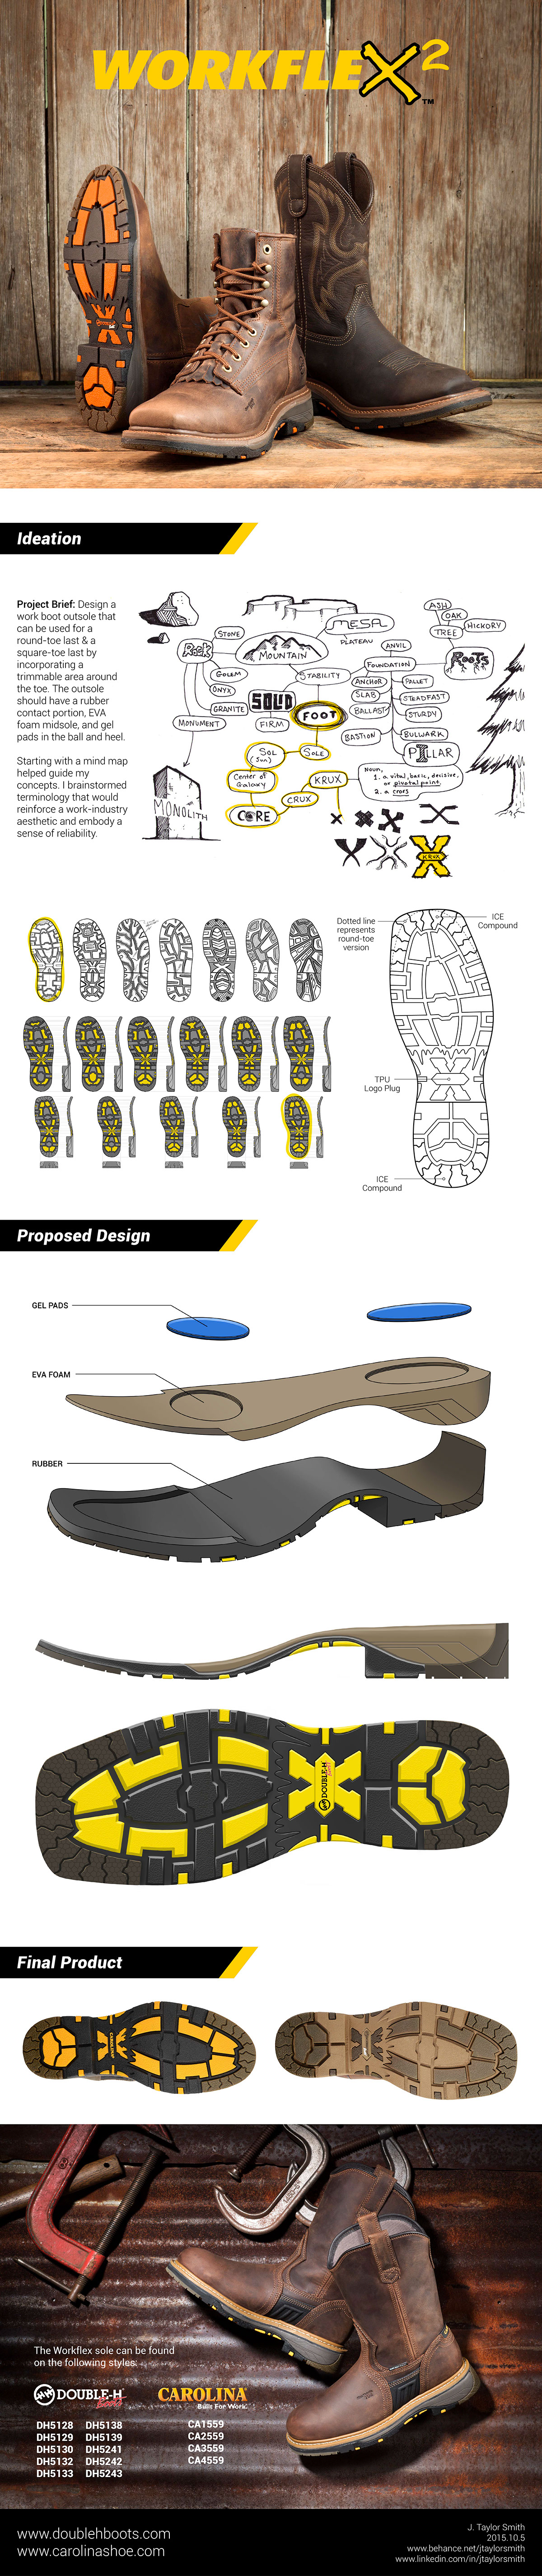 footwear boot Fashion  branding  OUTSOLE boots design